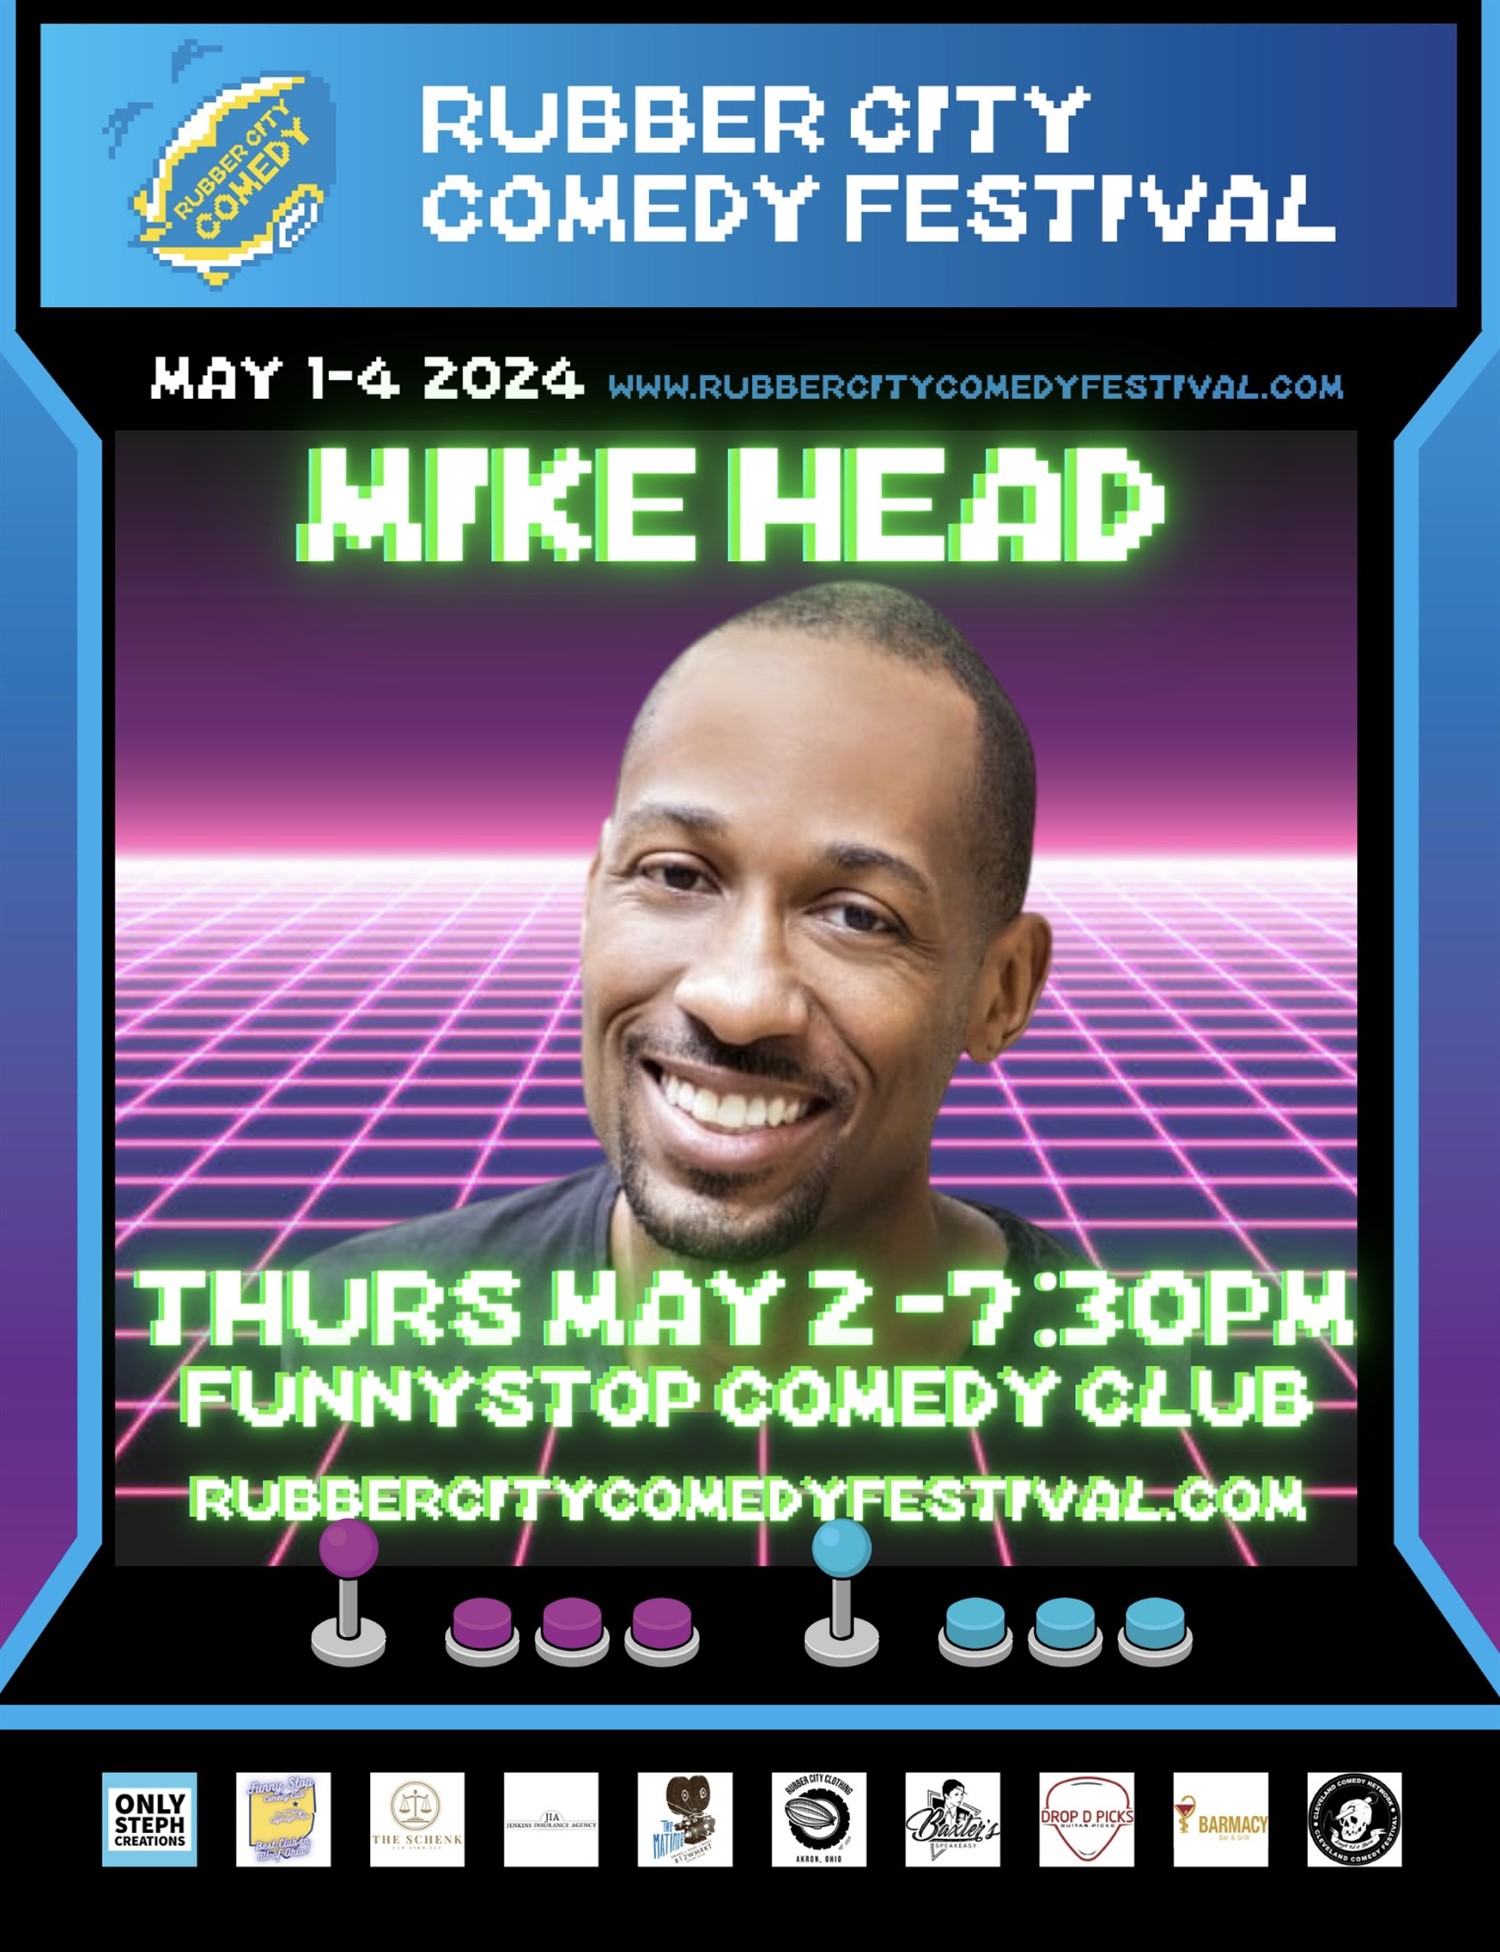 Mike Head Headlines for Rubber City Comedy Festival Funny Stop Comedy Club on May 02, 19:30@Funny Stop Comedy Club - Buy tickets and Get information on Funny Stop funnystop.online